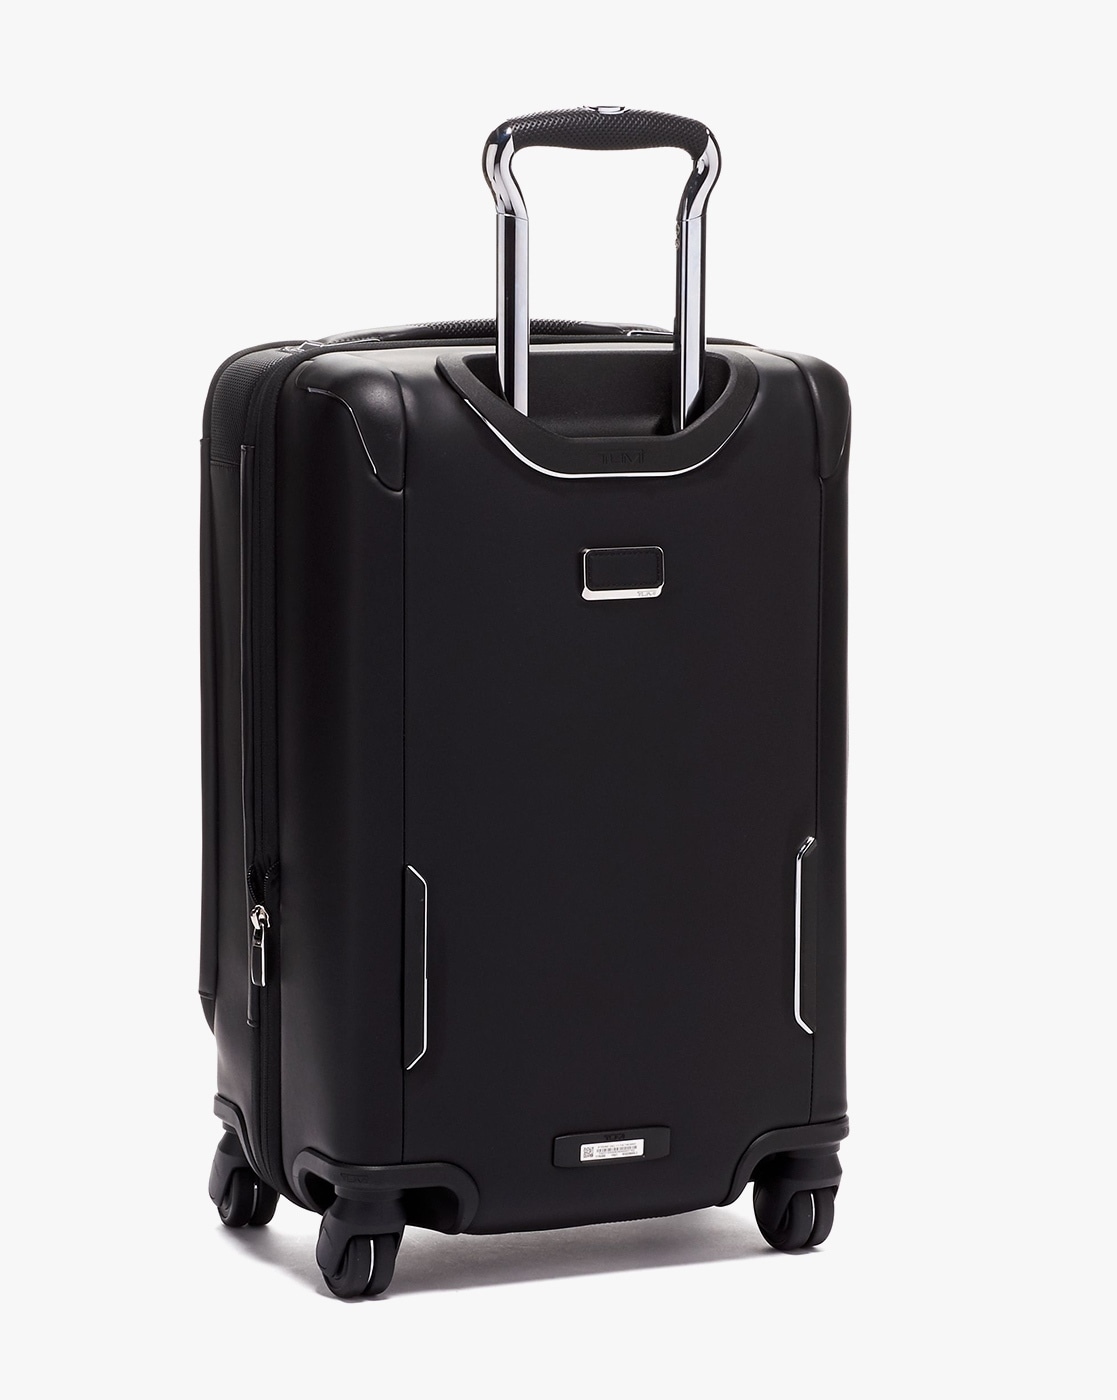 Samsonite to buy Tumi for $1.8 billion as it expands premium luggage  offerings | Reuters